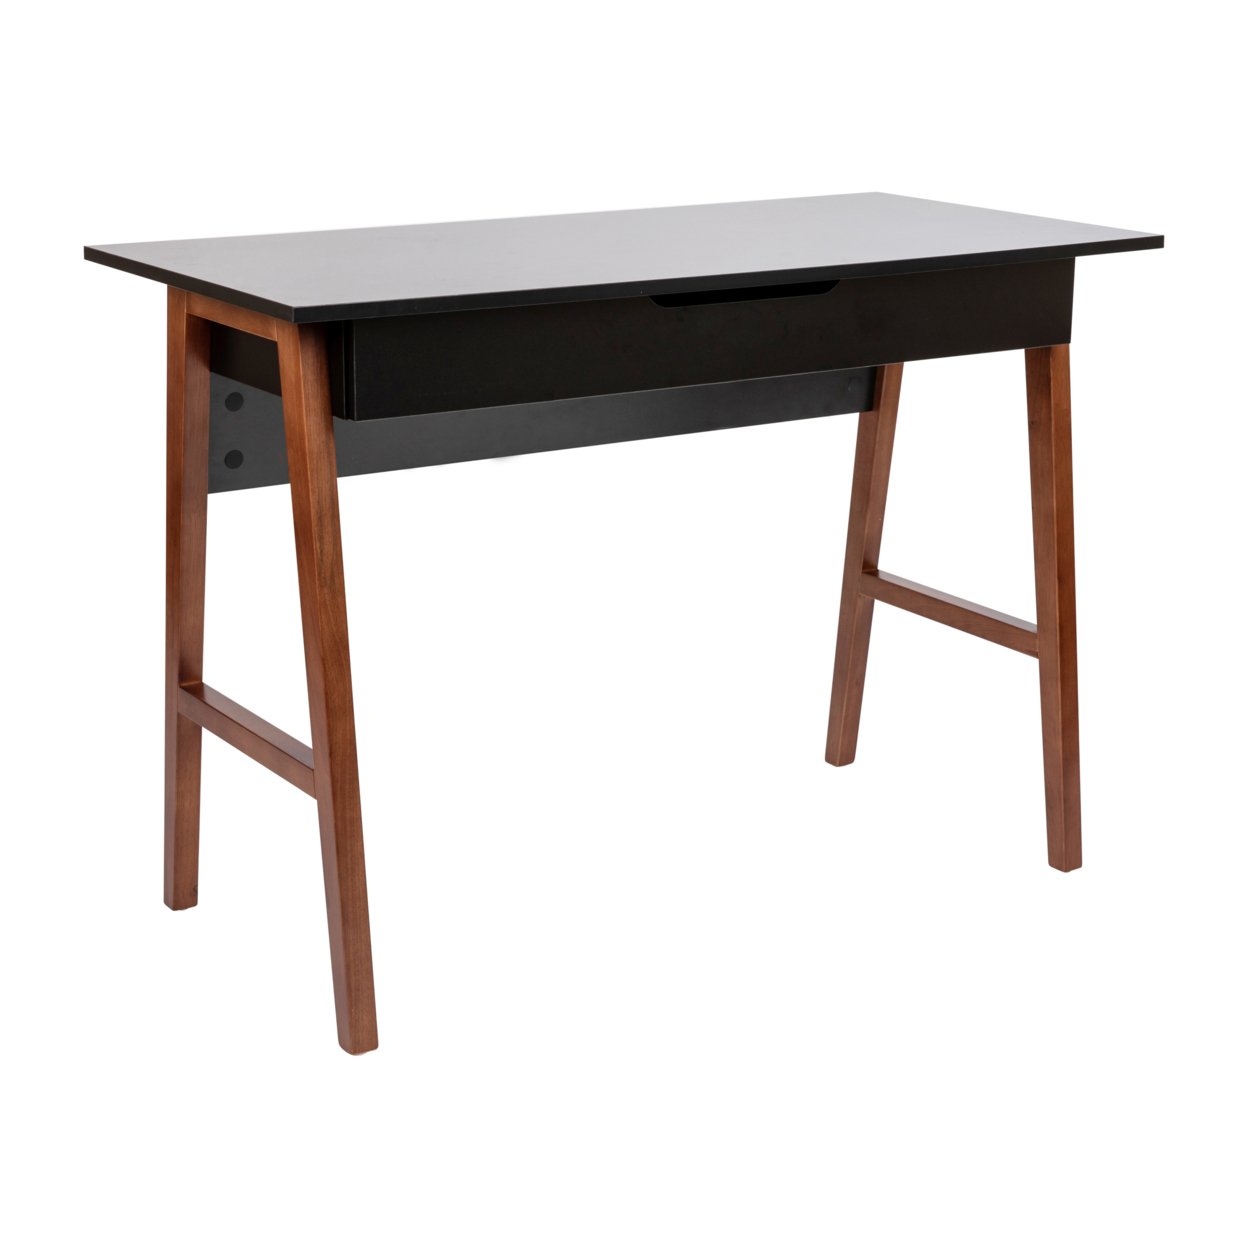 Home Office Writing Computer Desk With Drawer - Table Desk For Writing And Work, Black And Walnut